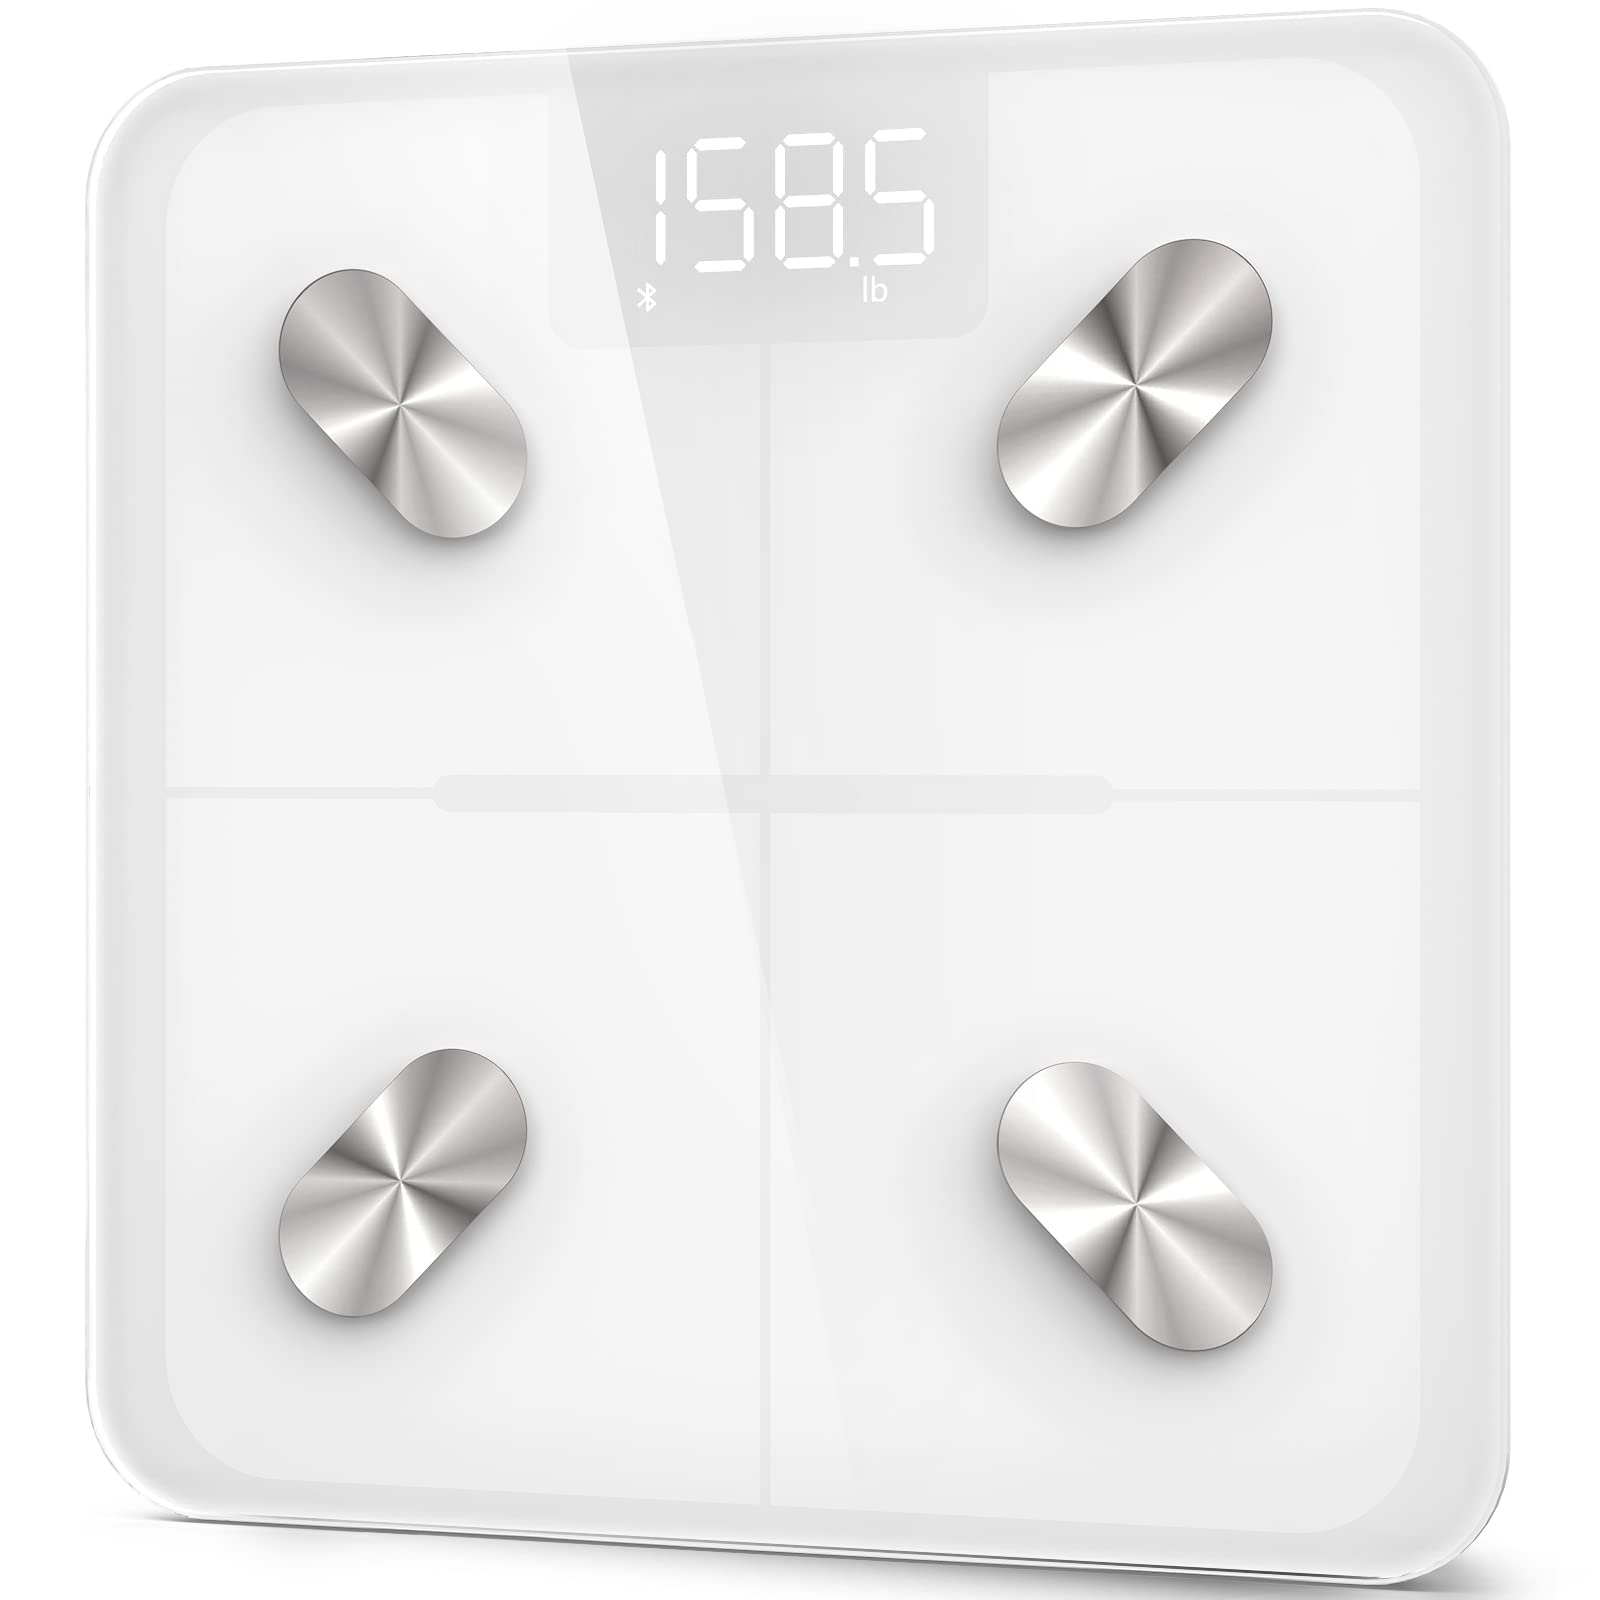 Etekcity Bluetooth Smart Scale Review (ESF17)